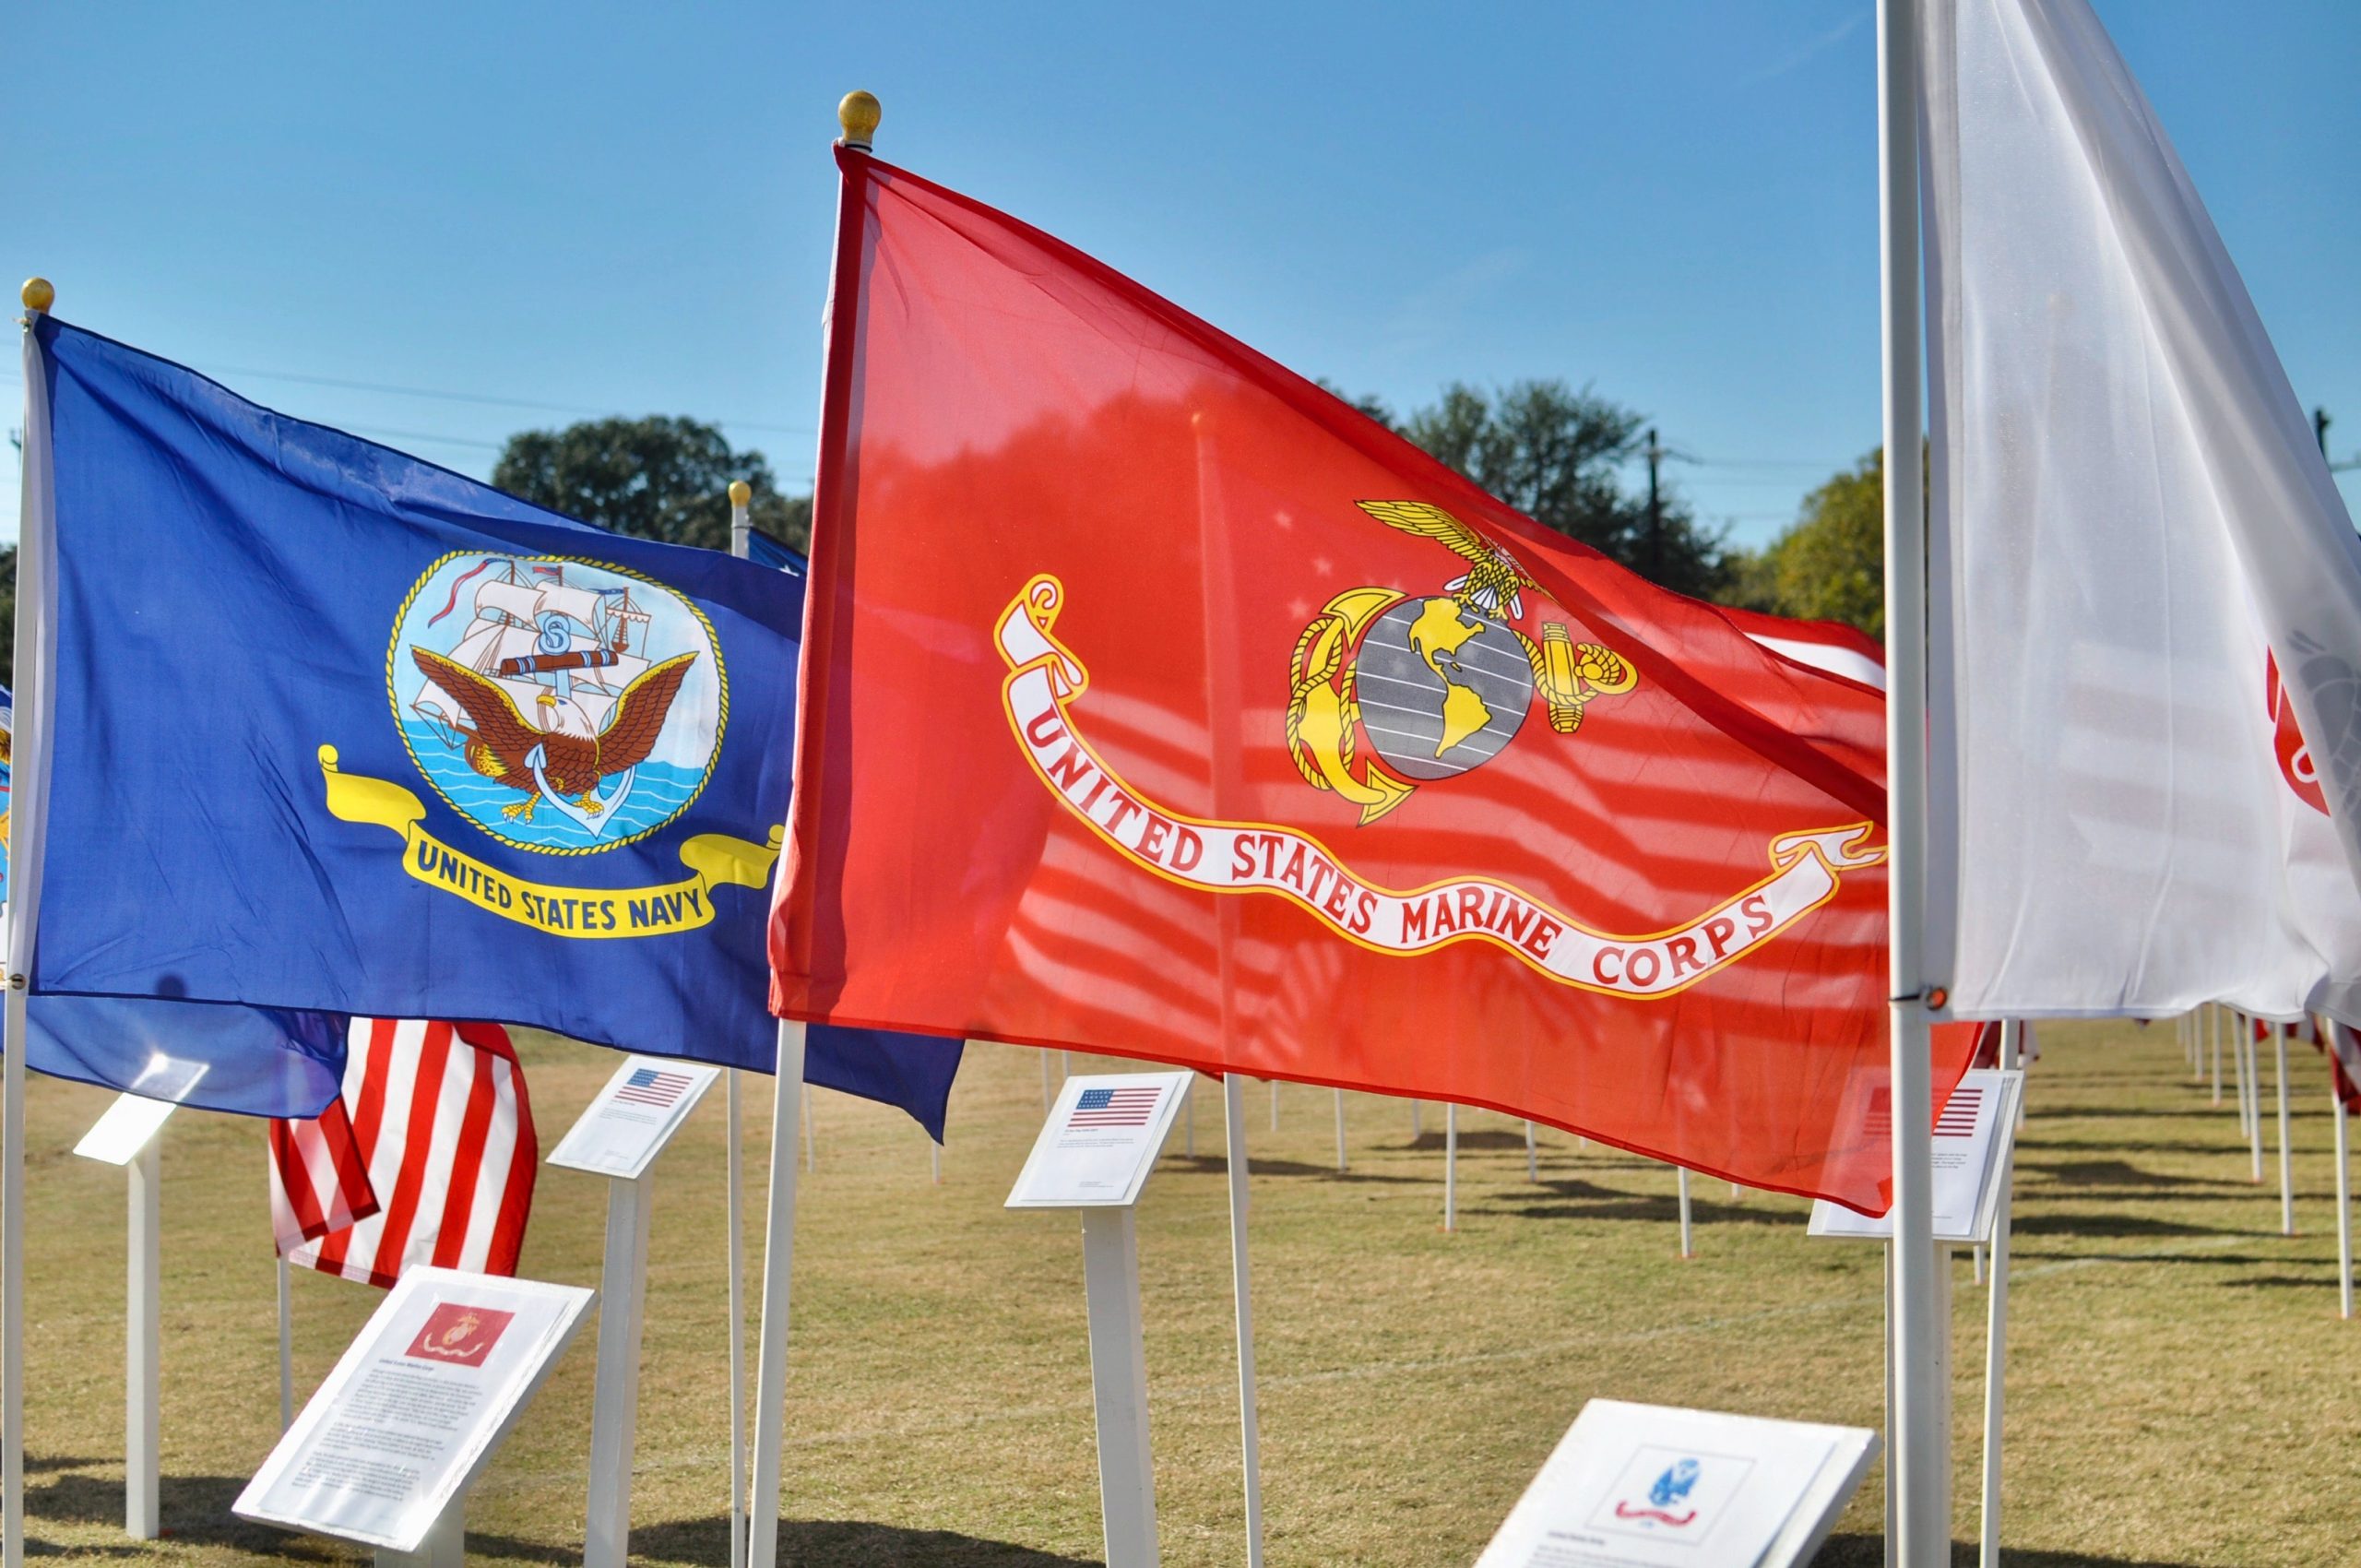 navy and marine corp flags on lawn